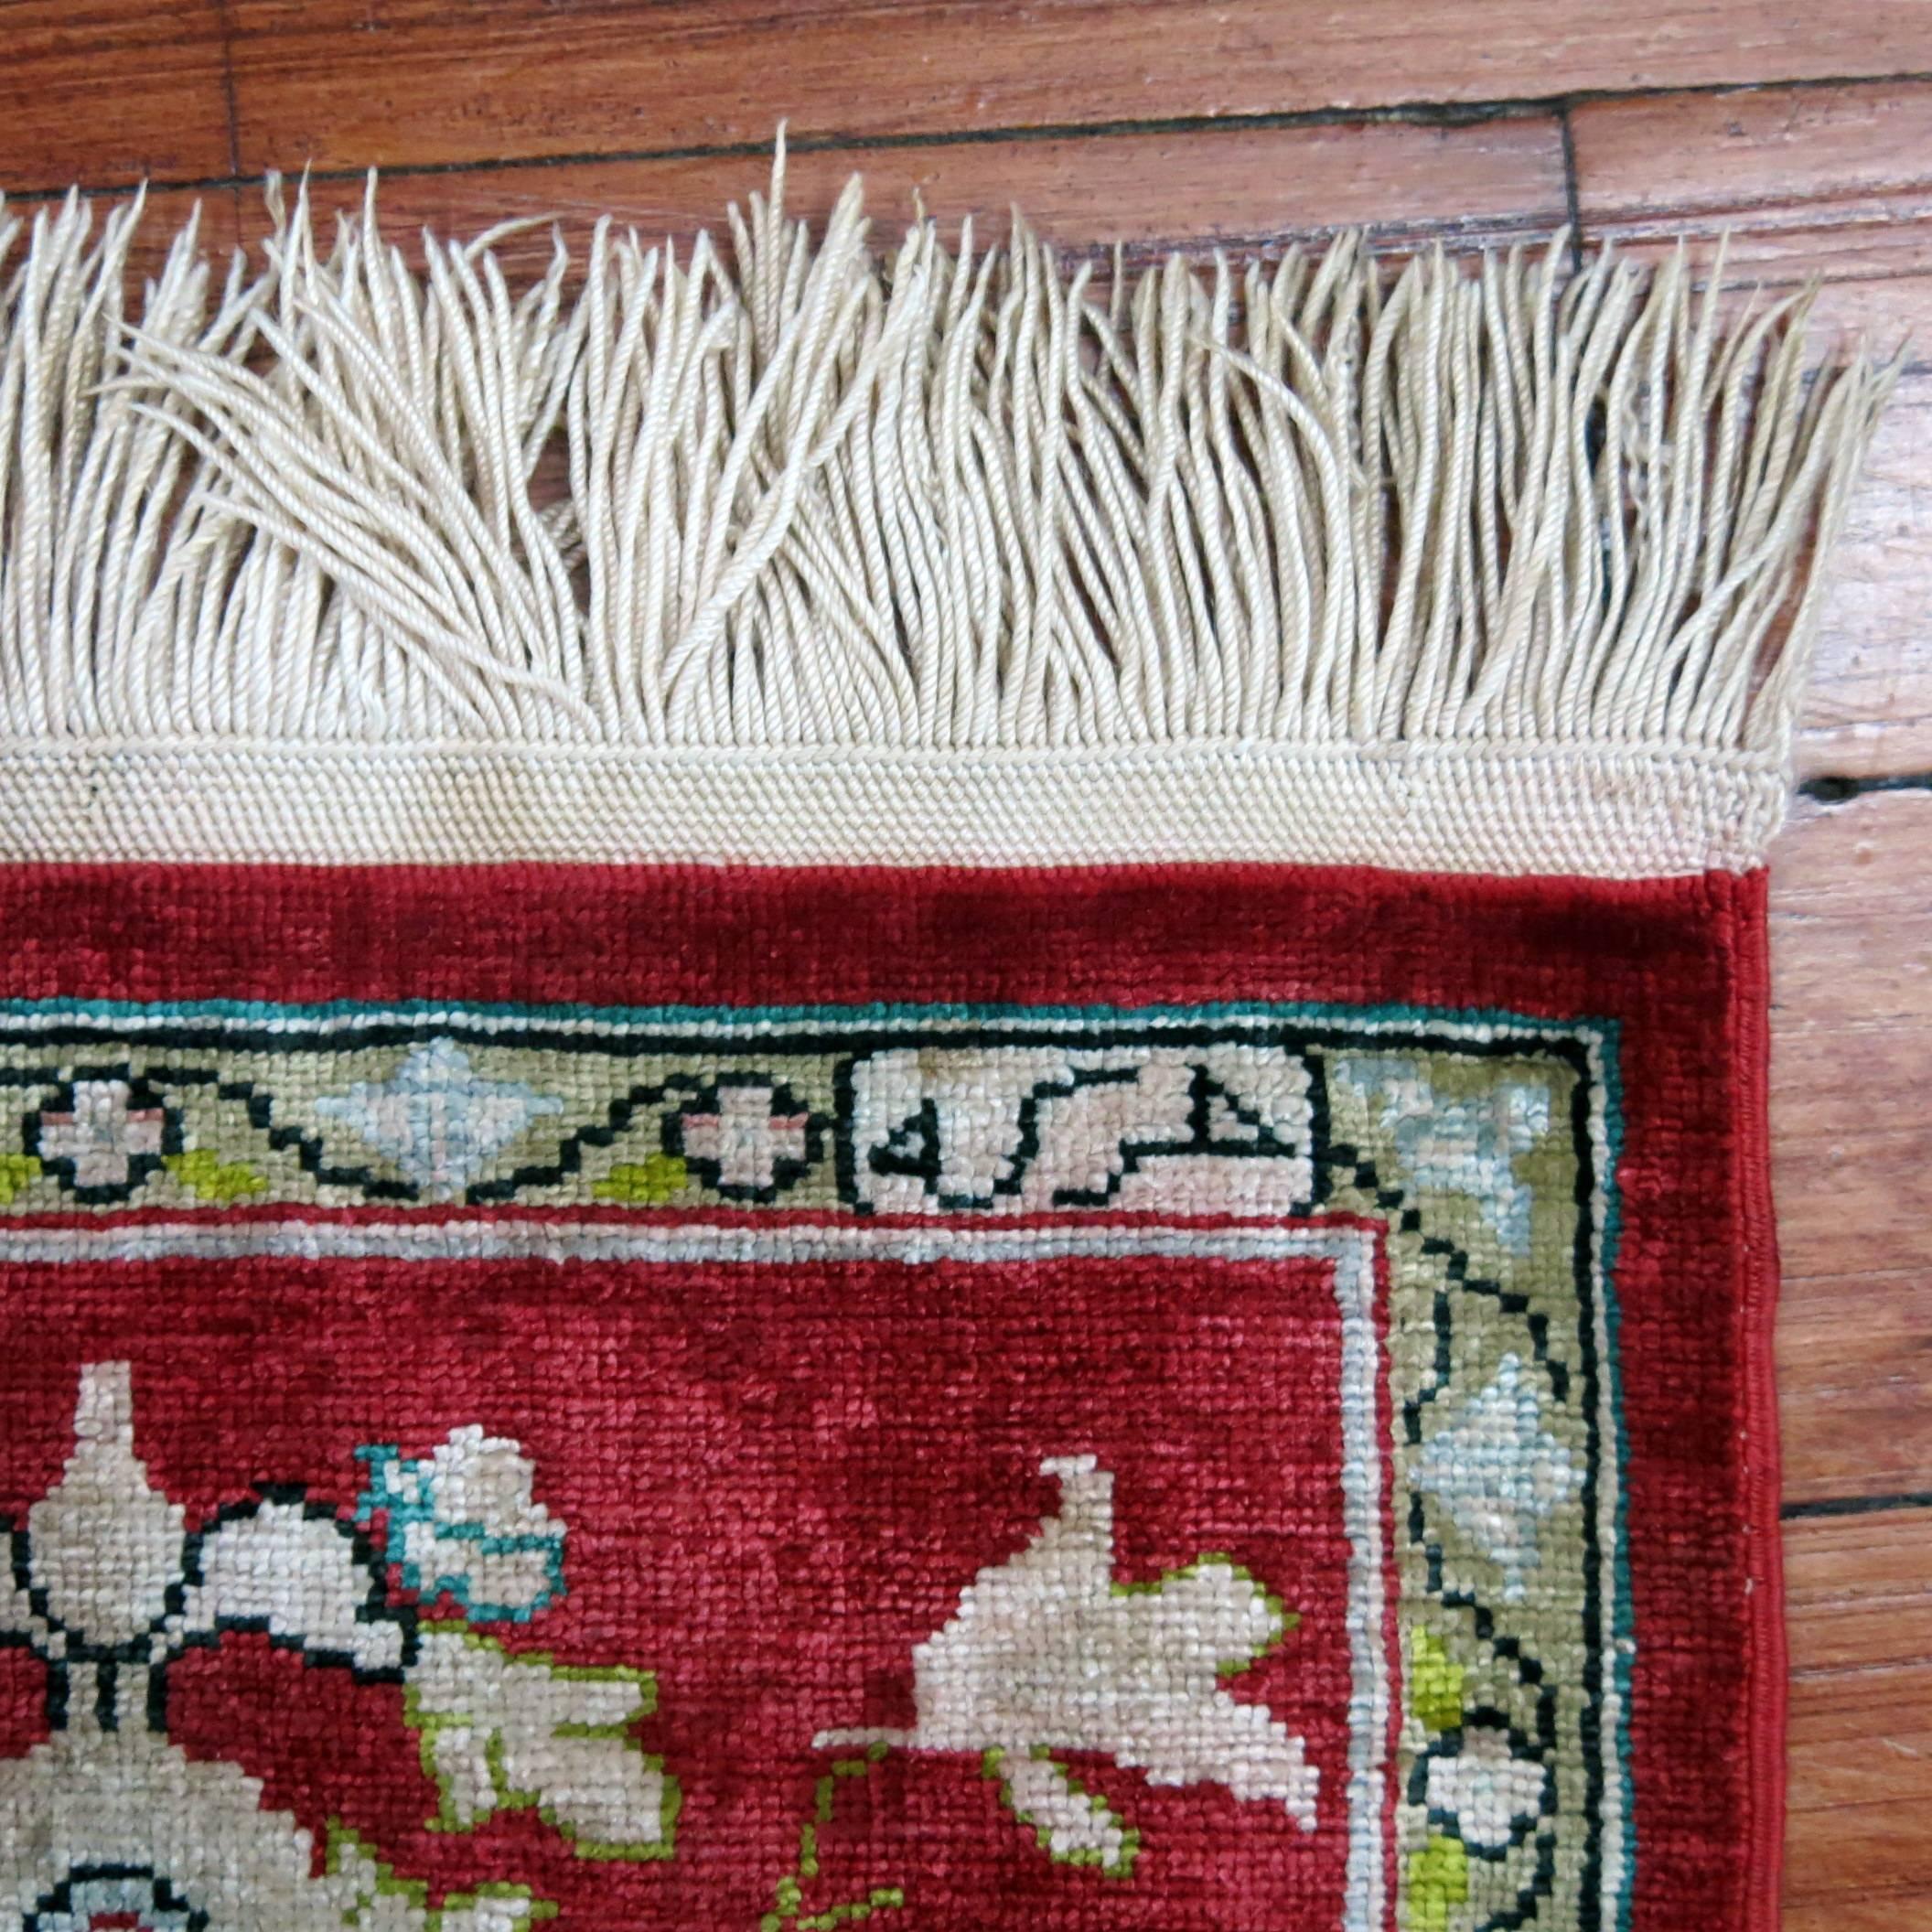 Tiny silk Turkish rug in Chinese red.

Measures: 10” x 12”.